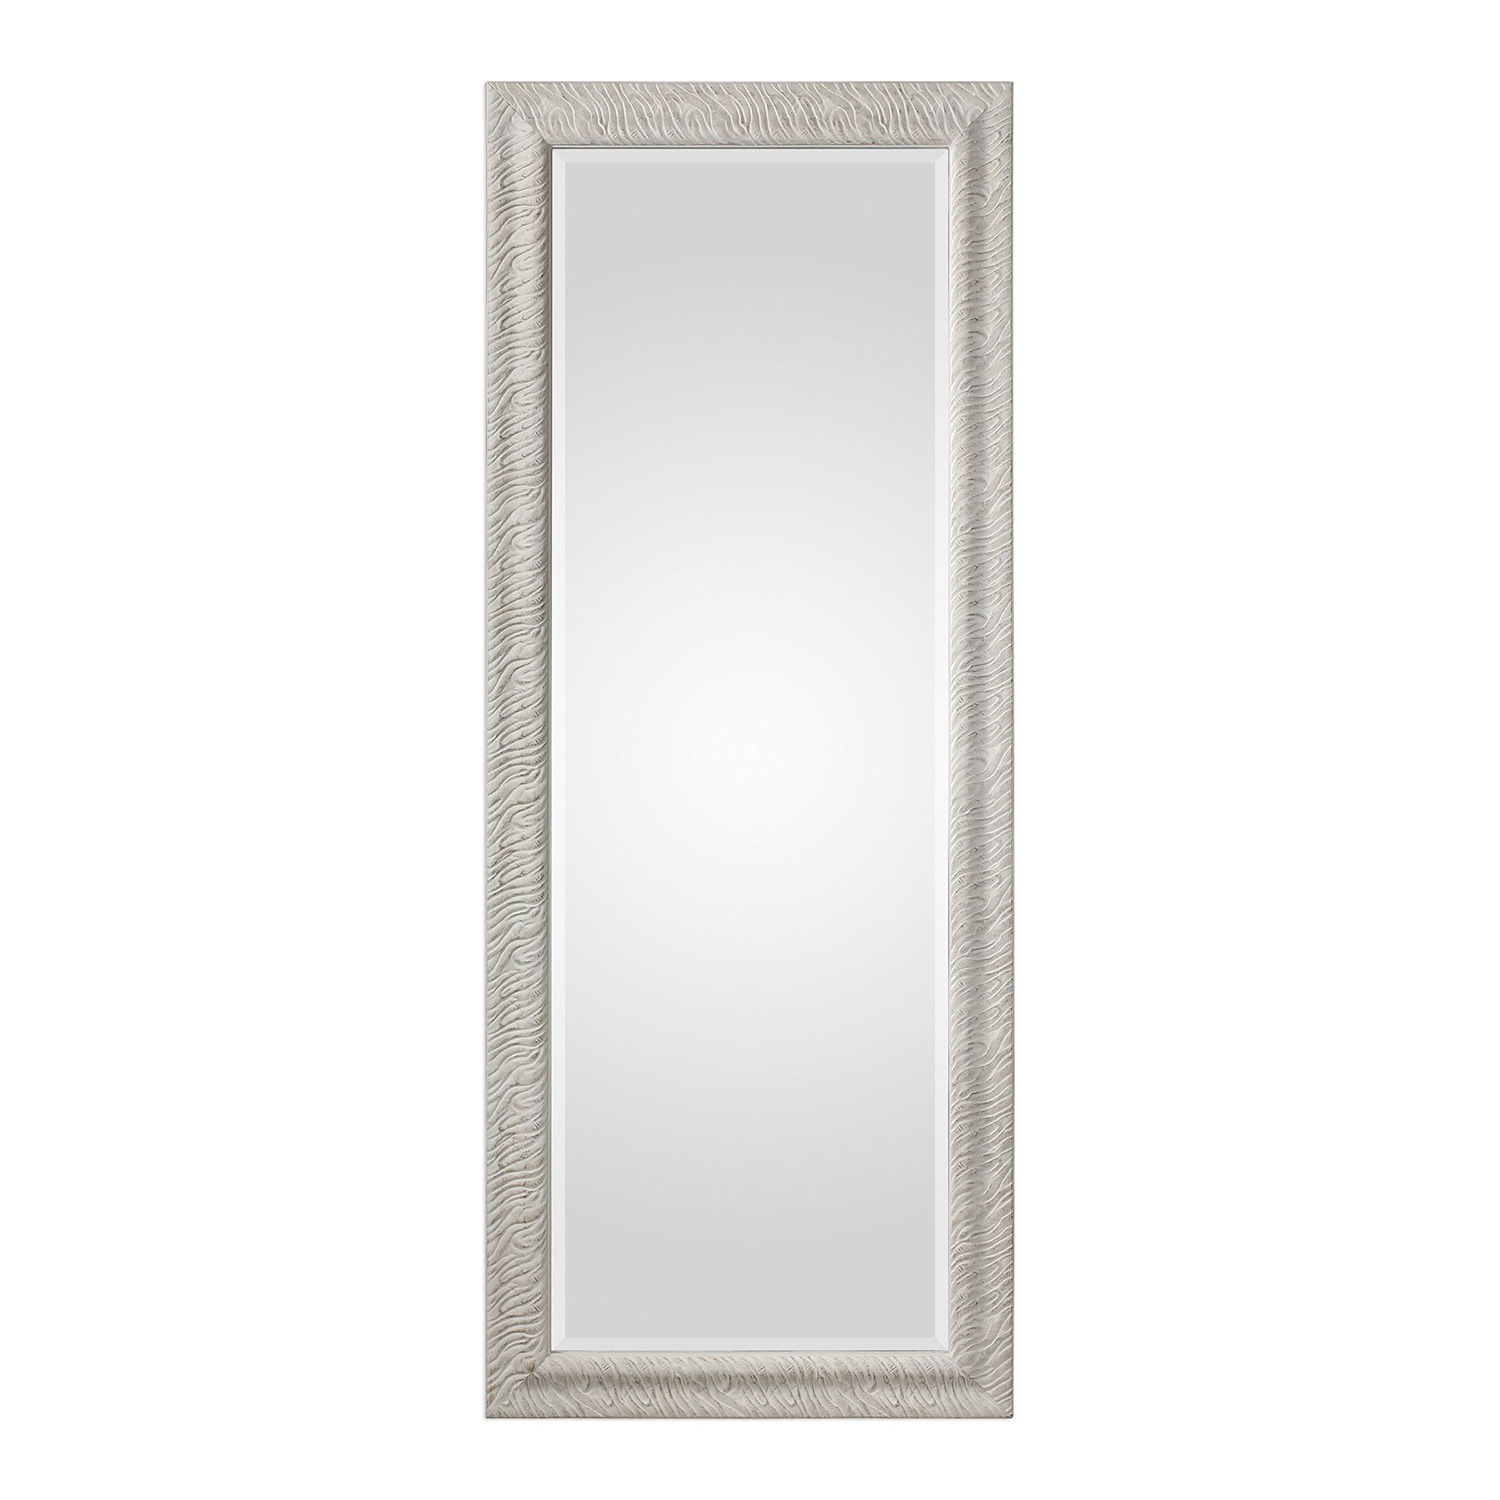 Uttermost Pateley Wood Mirror - Aged White